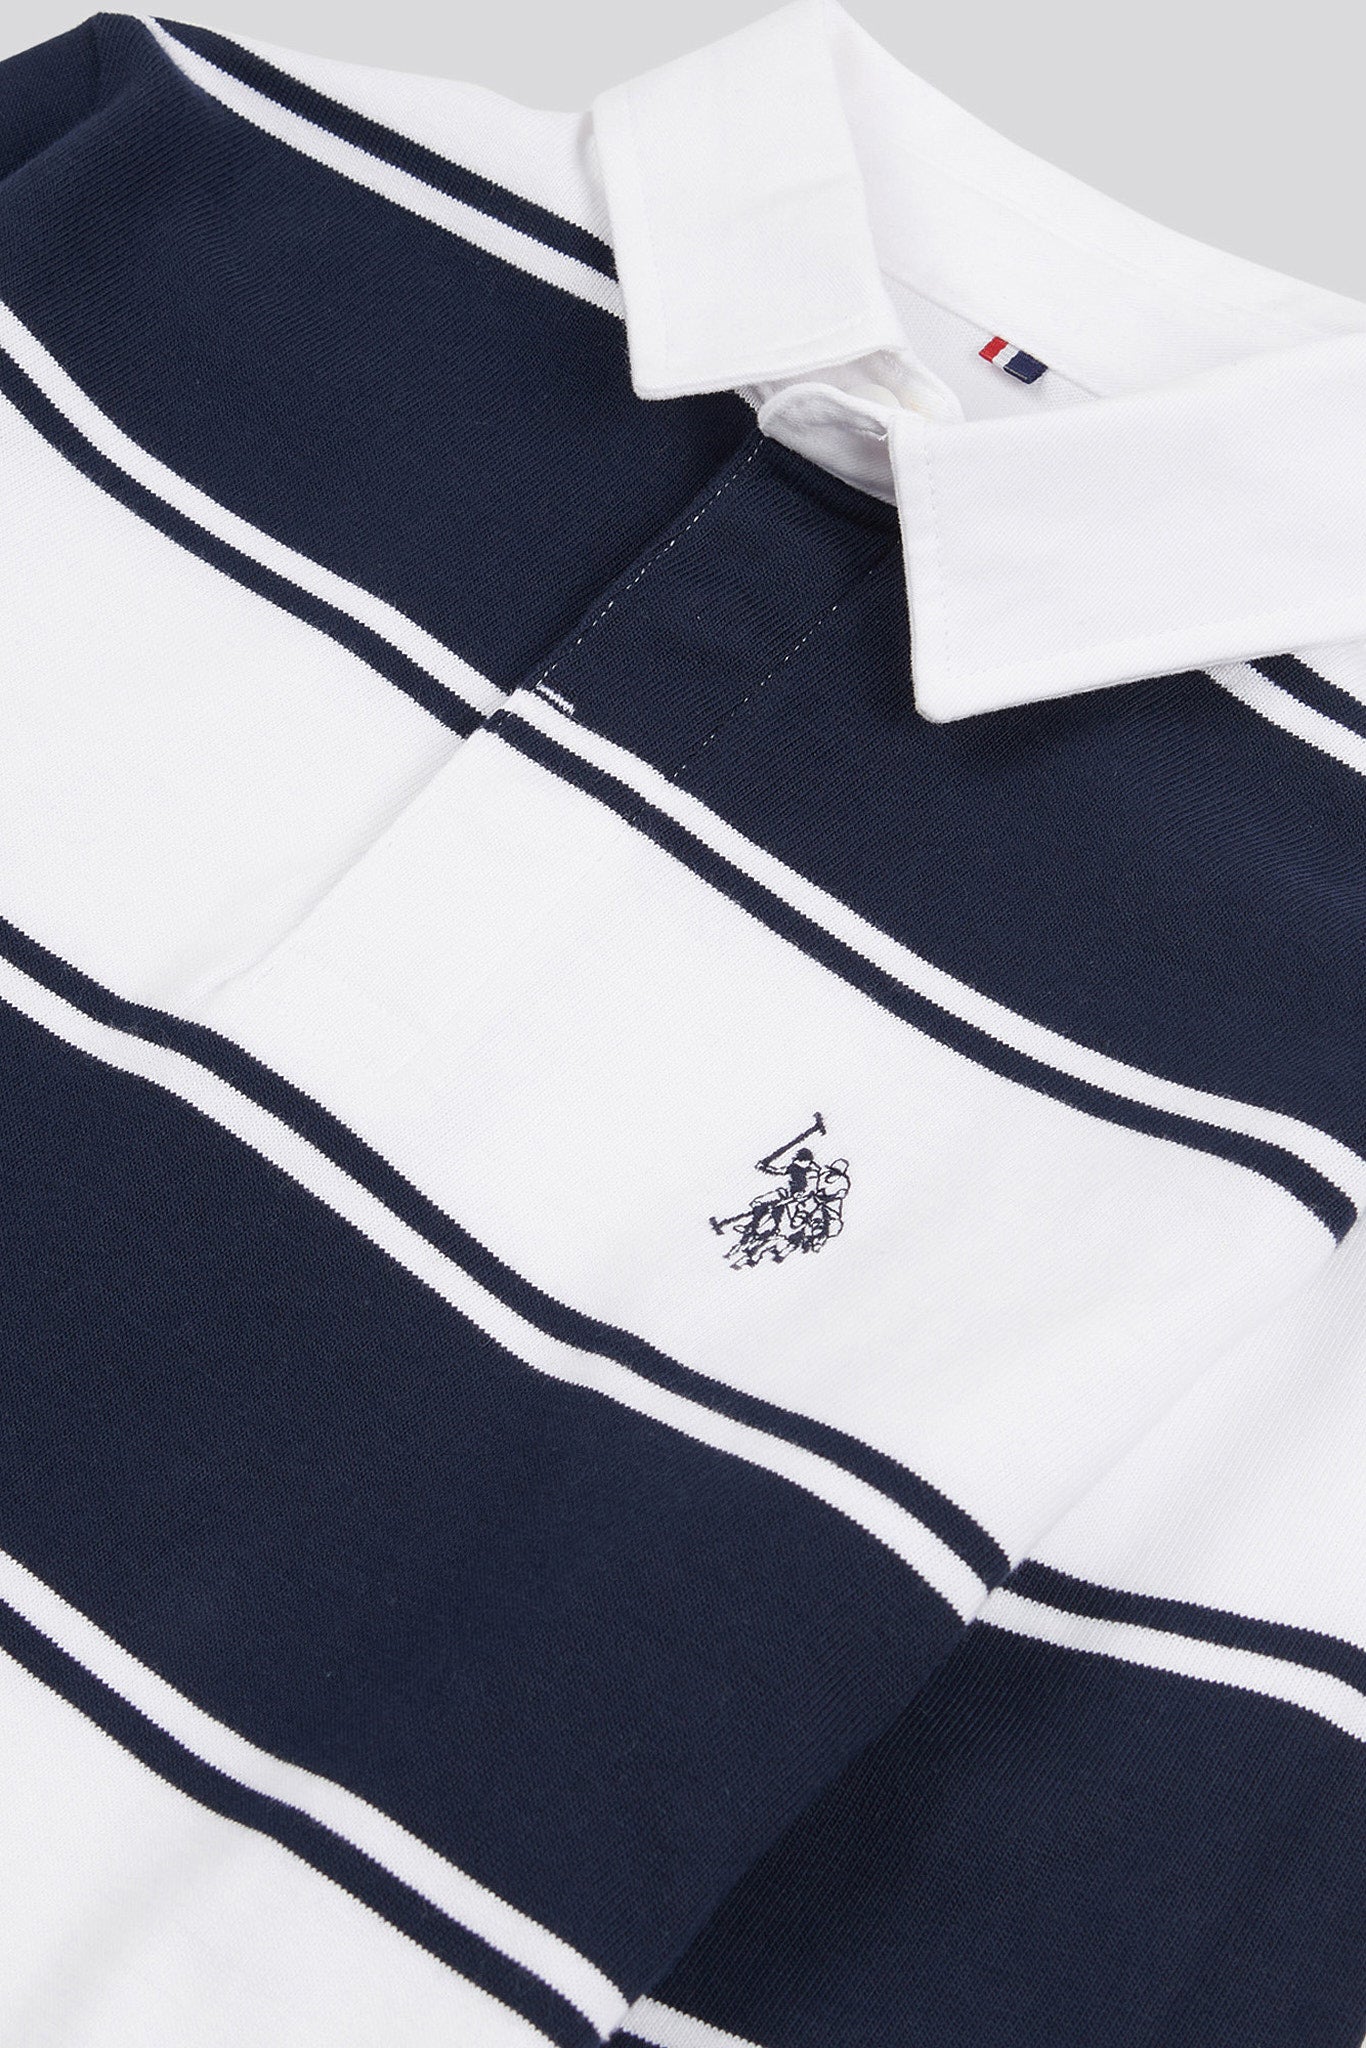 Boys Striped Rugby Shirt in Bright White